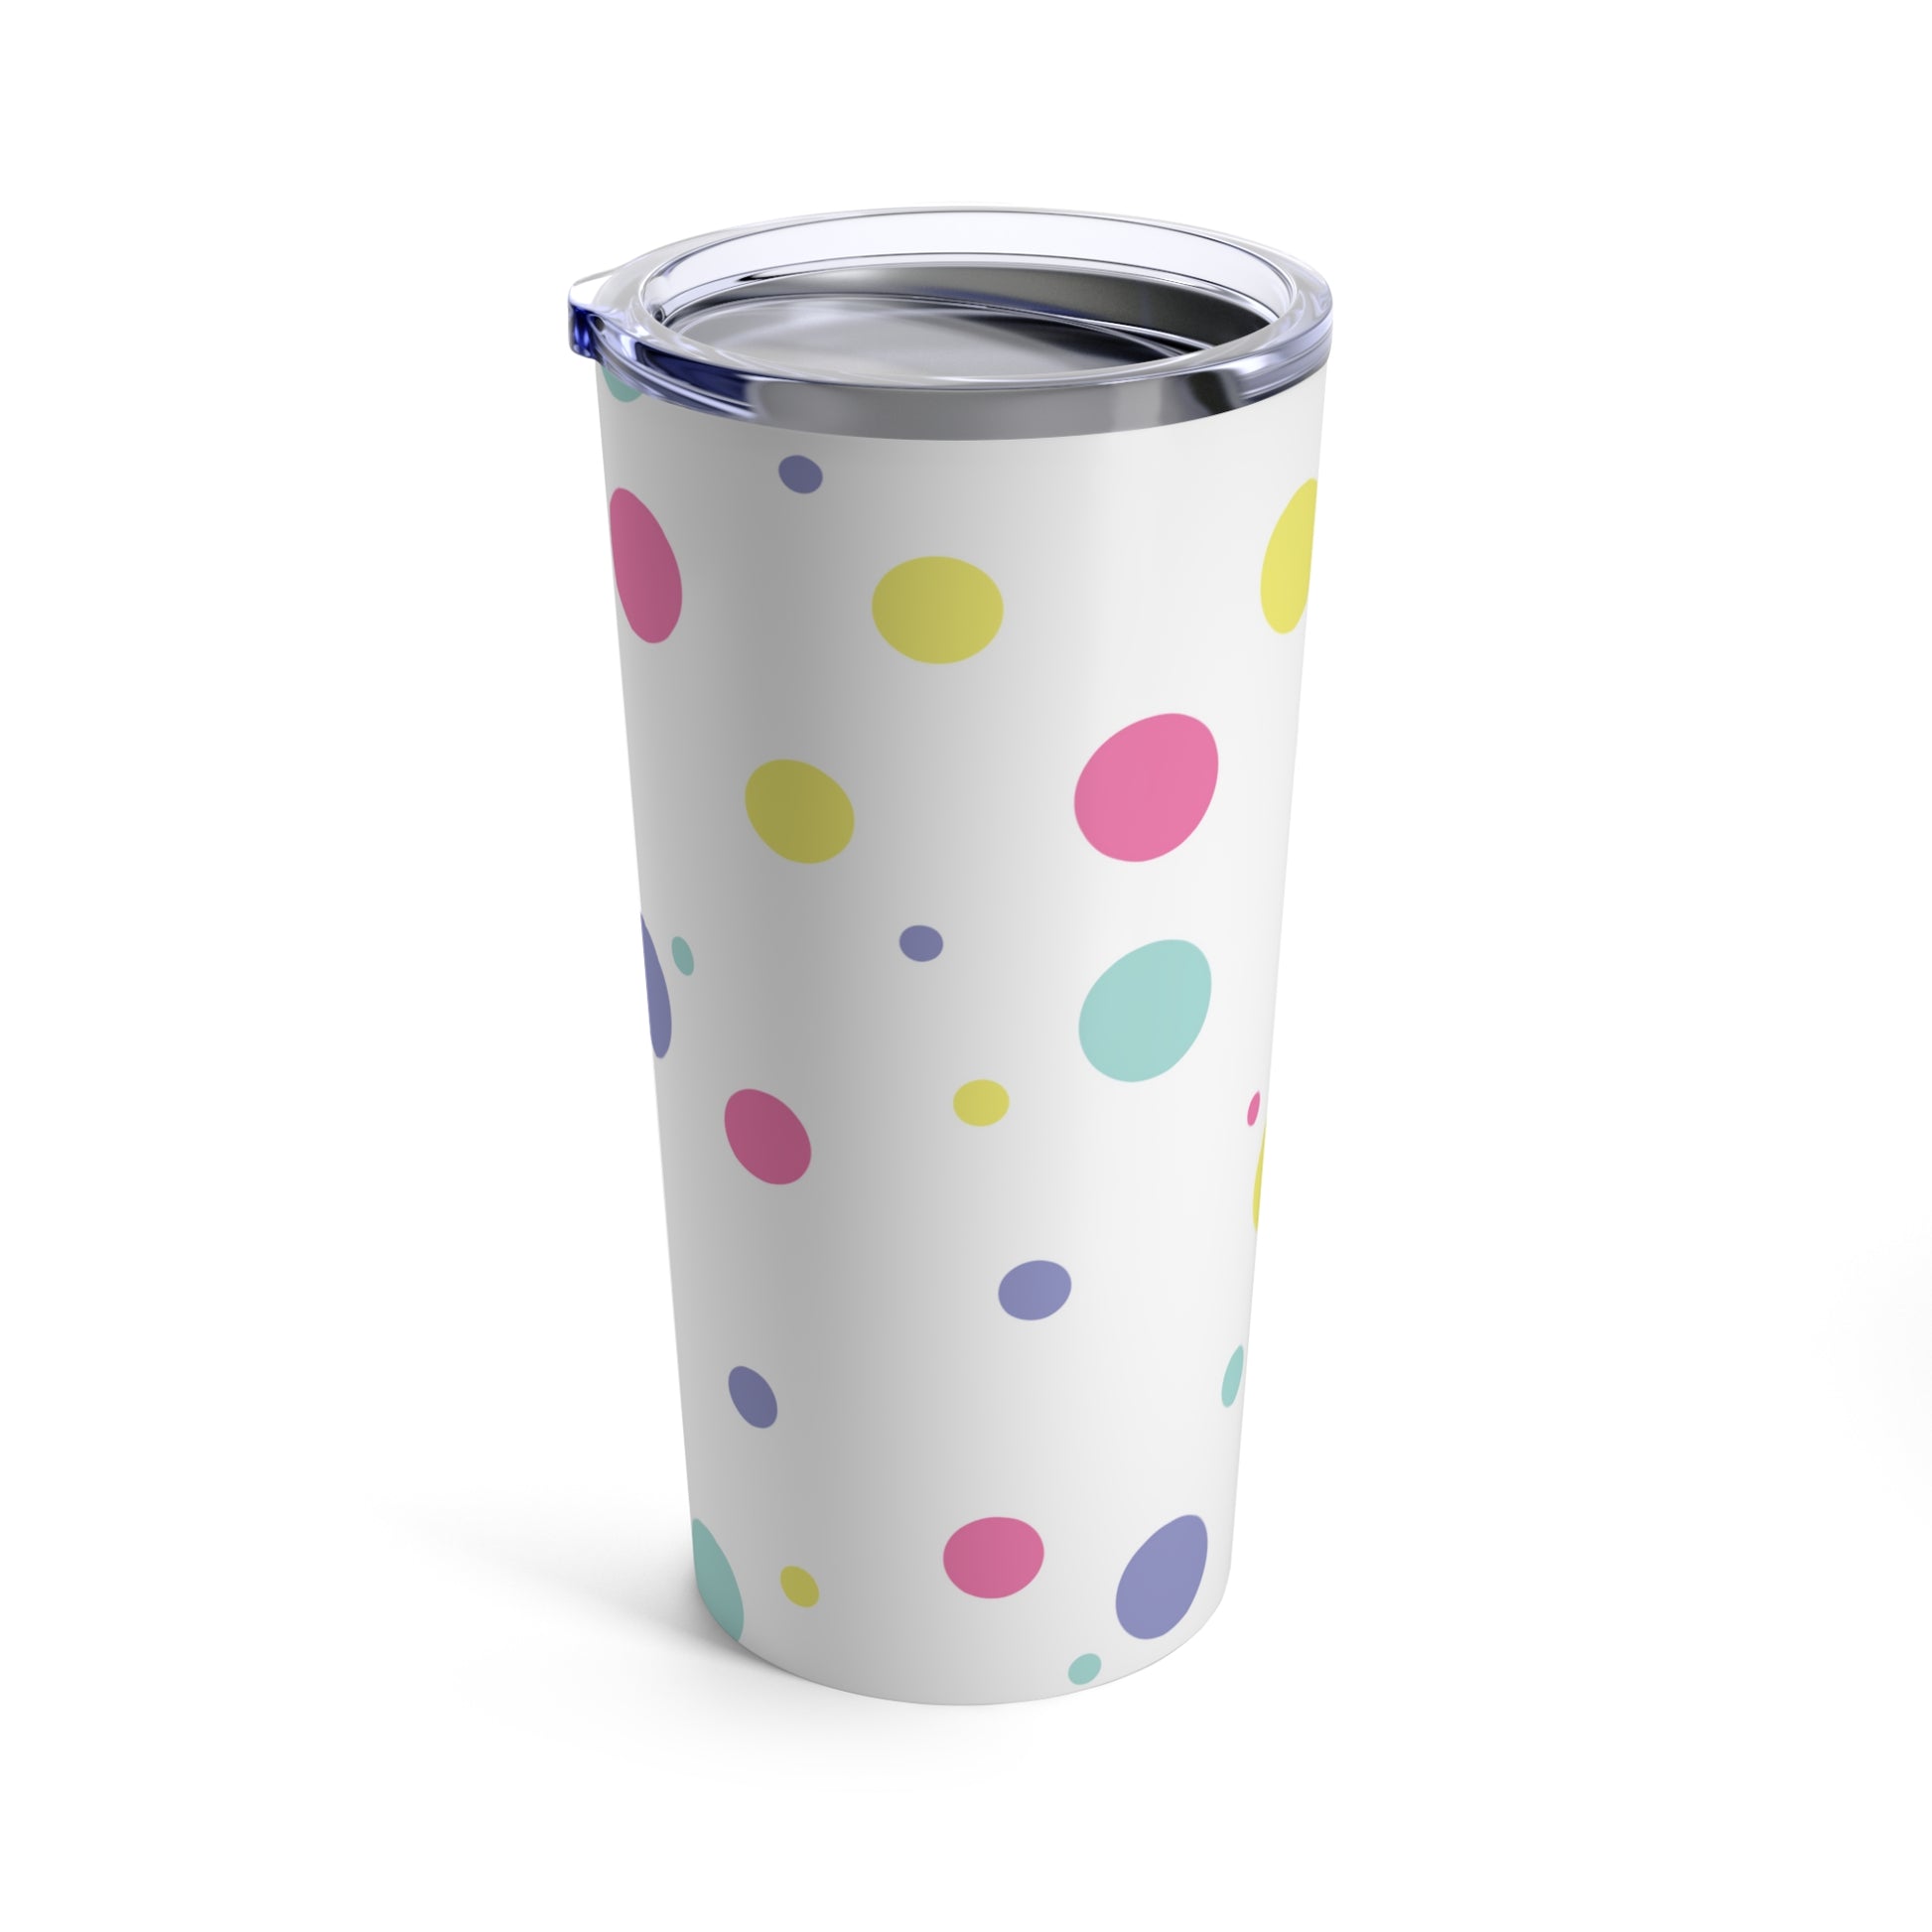 Sentence with replaced product: A colorful Printify confetti dots tumbler with a lid.